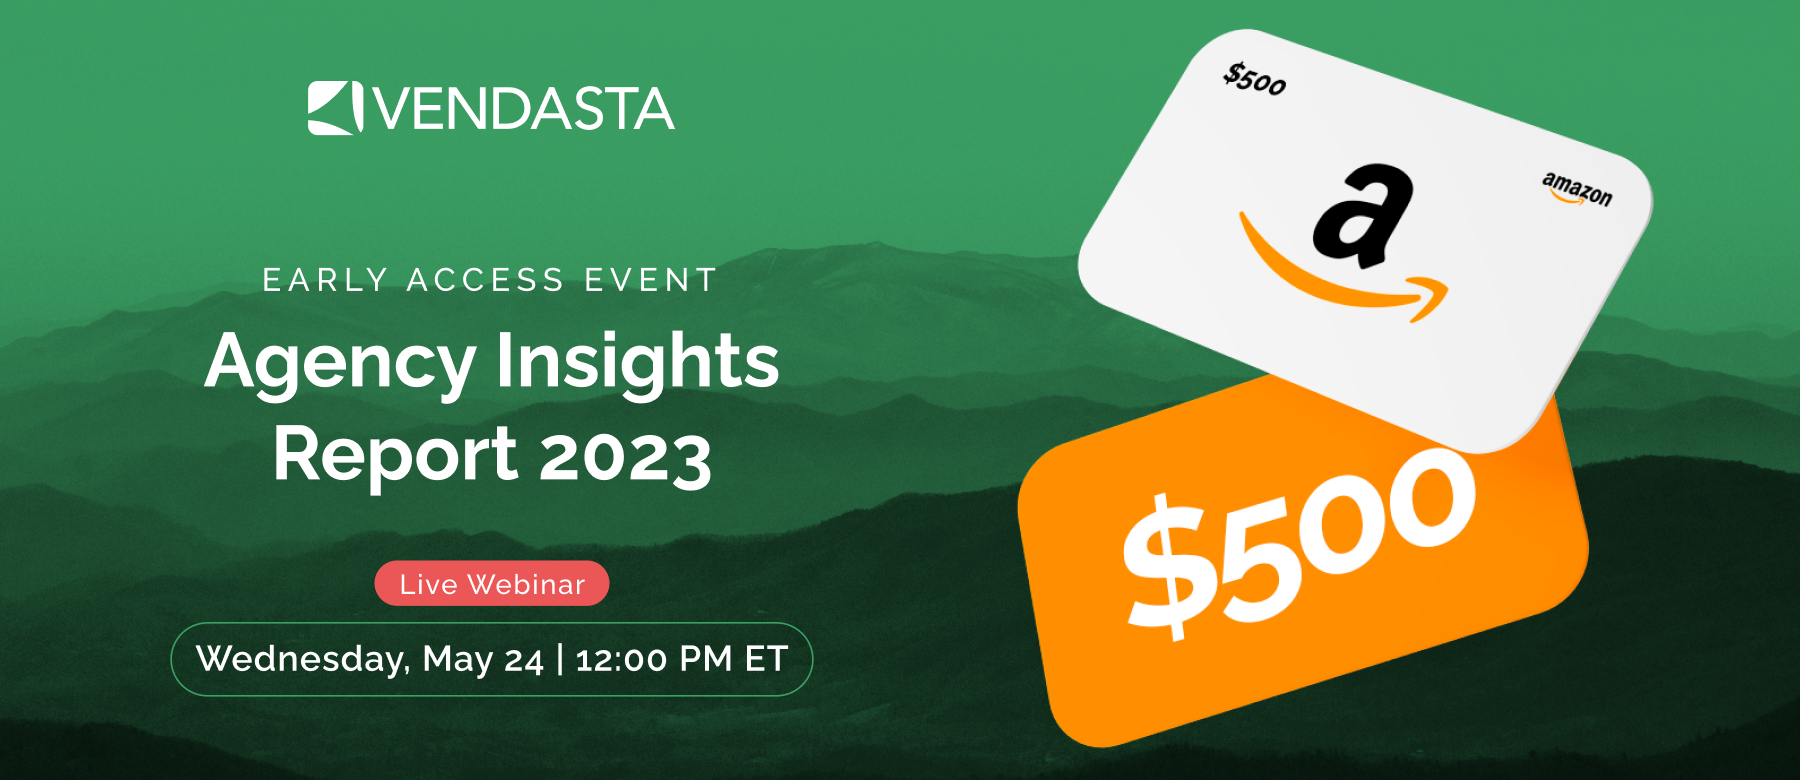 Agency Insights Report 2023 Event Giveaway